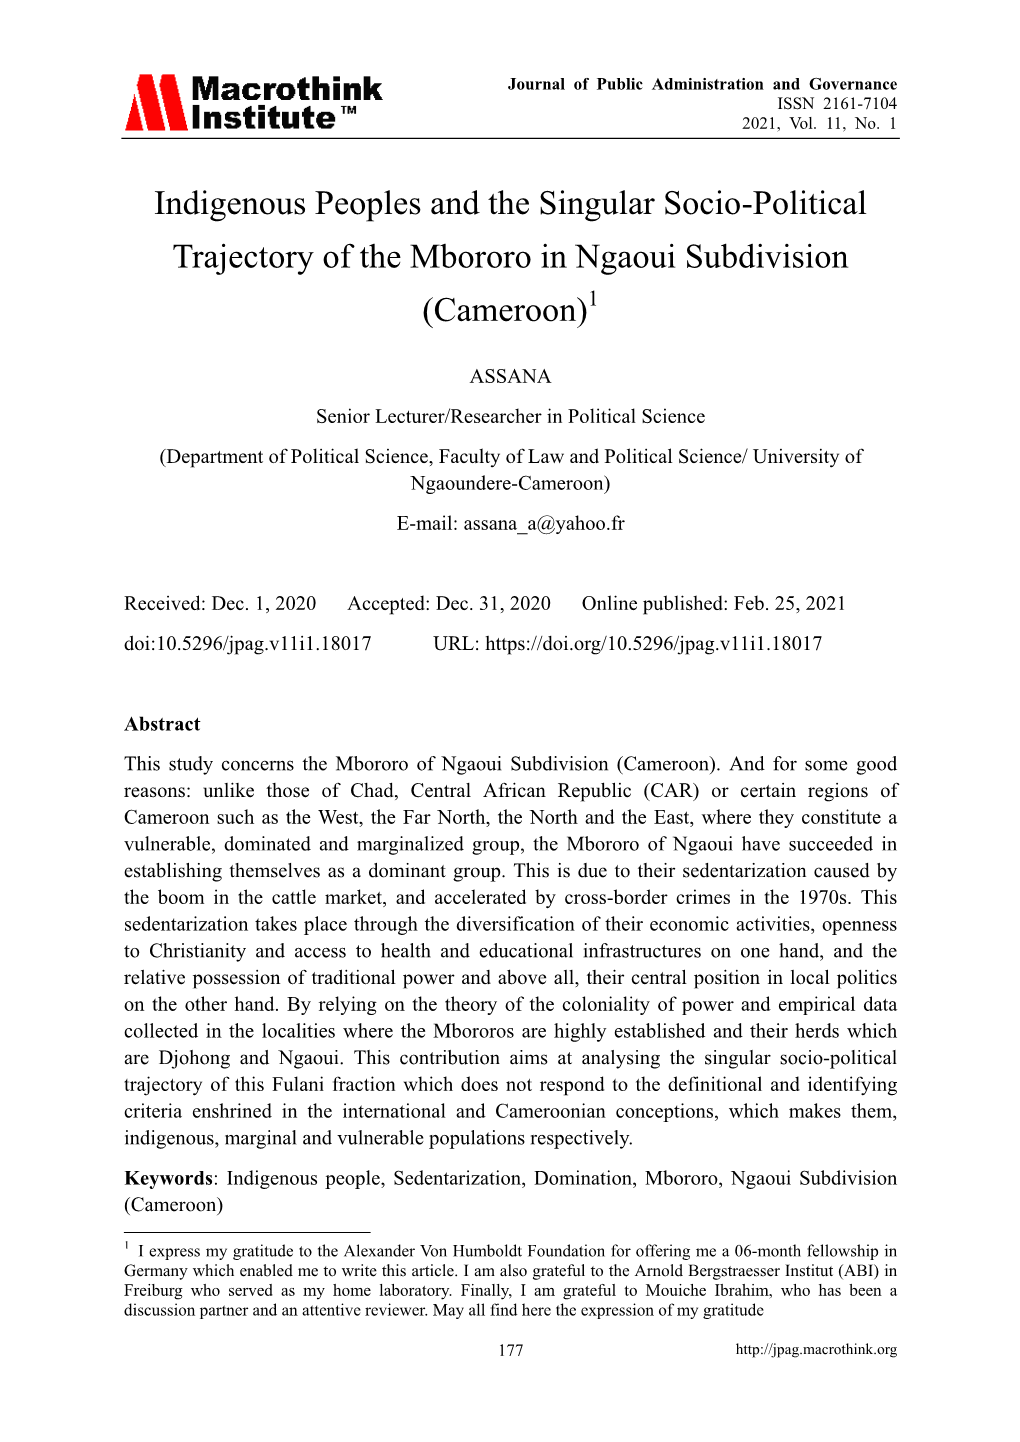 Indigenous Peoples and the Singular Socio-Political Trajectory of the Mbororo in Ngaoui Subdivision (Cameroon)1